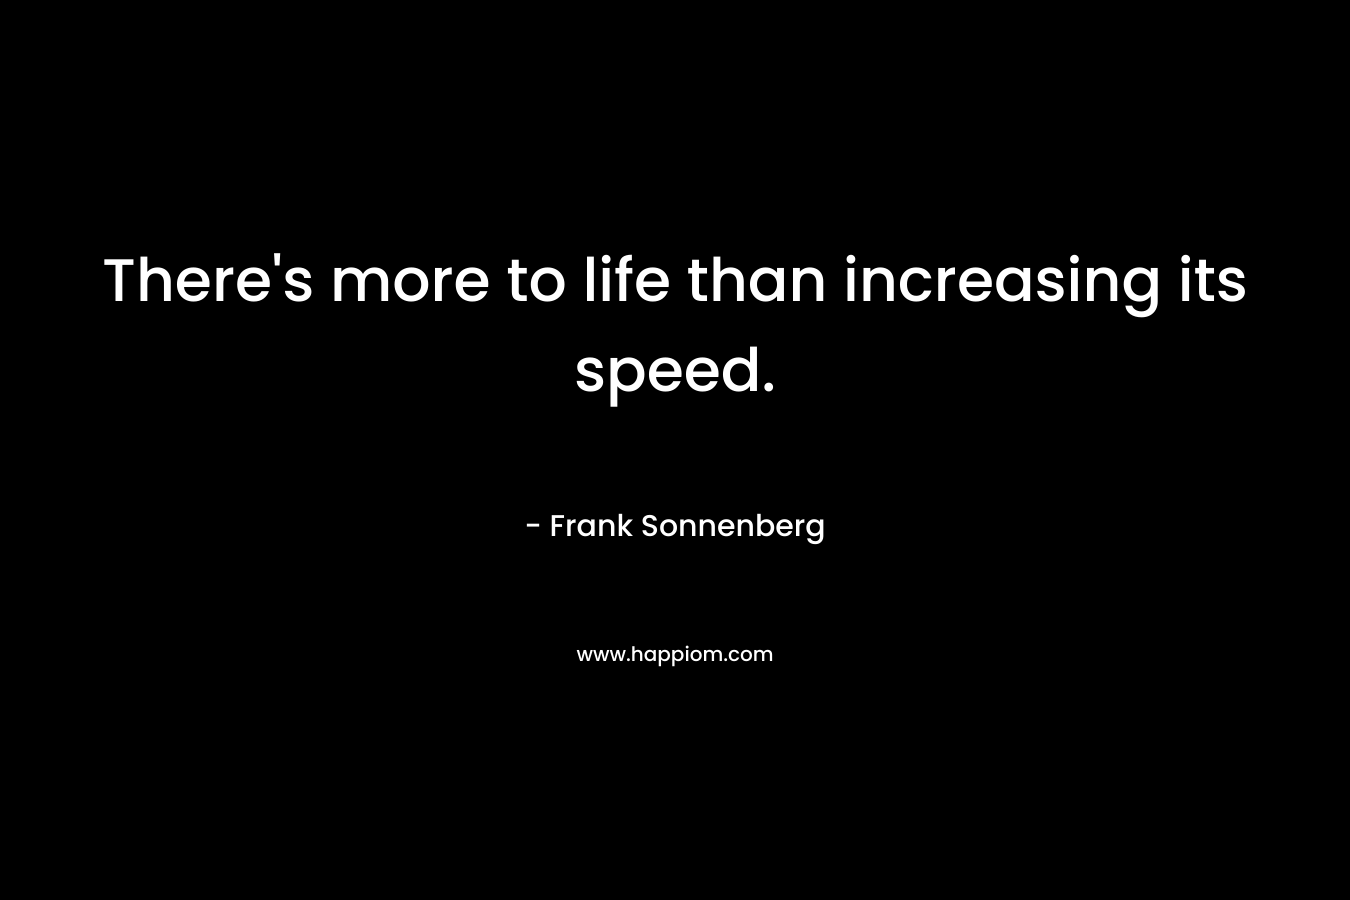 There's more to life than increasing its speed.